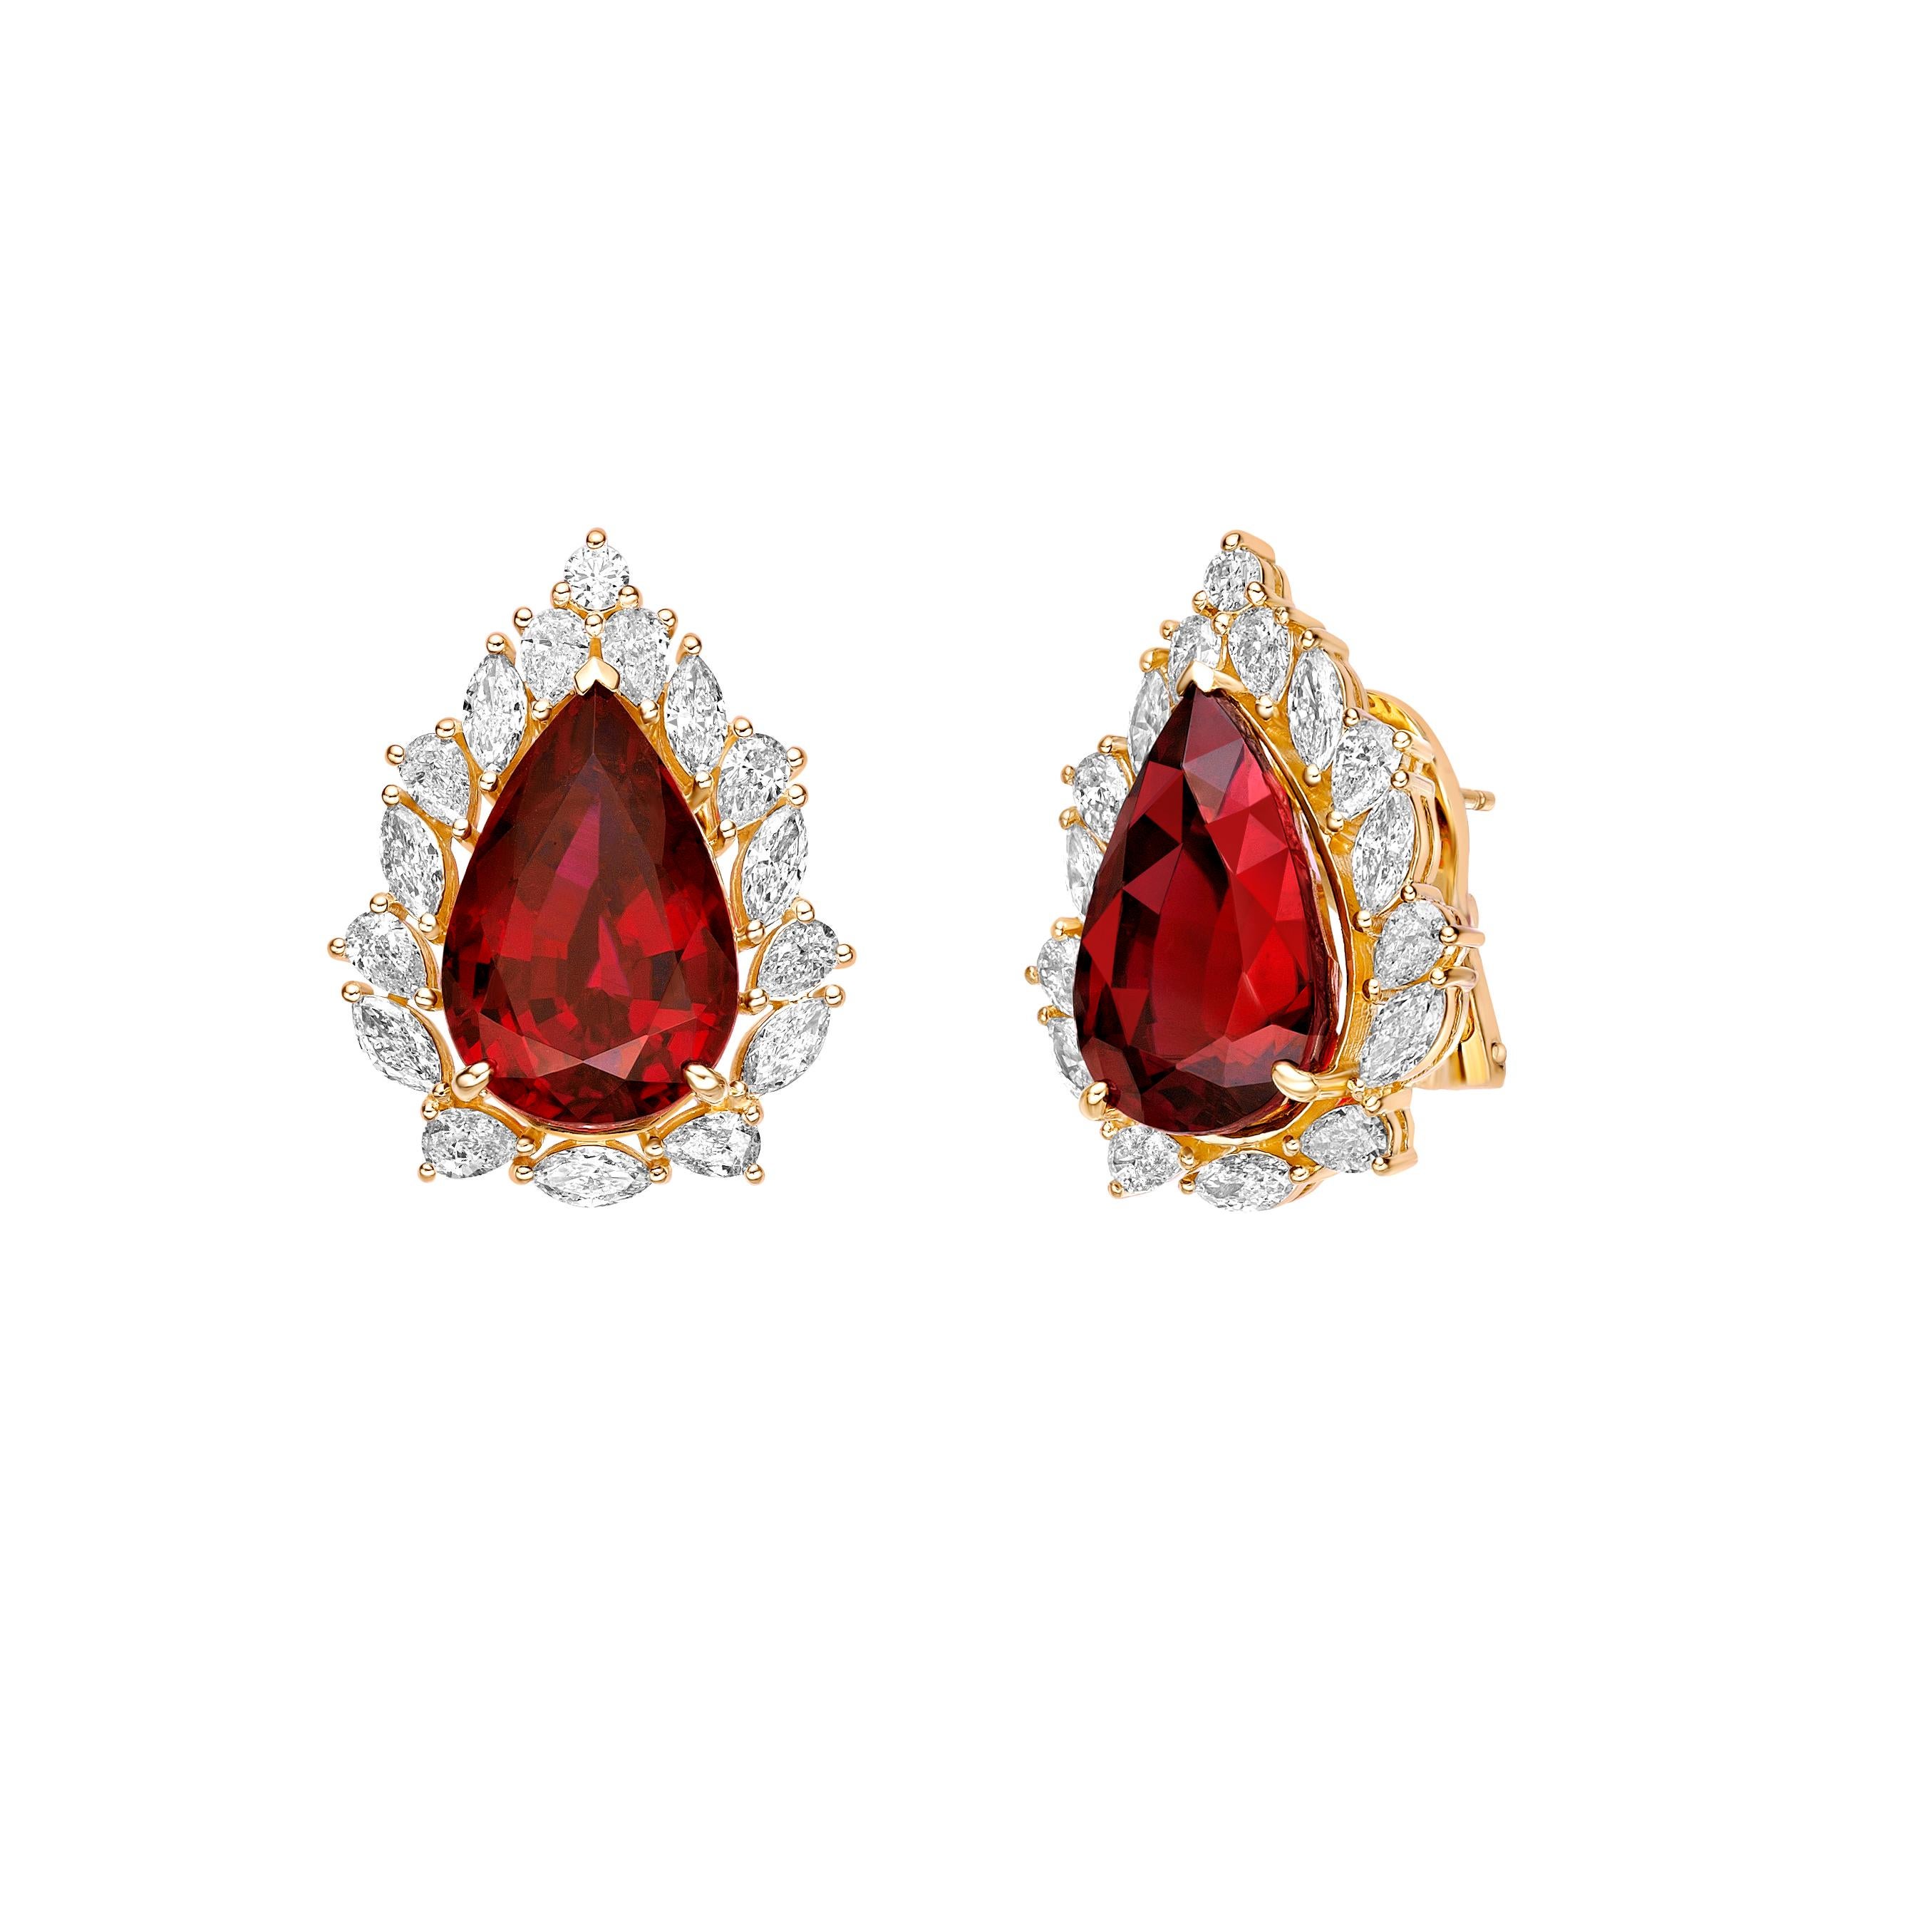 Pear Cut 20.955 Carat Rubellite Stud Earrings in 18Karat Yellow Gold with White Diamond. For Sale